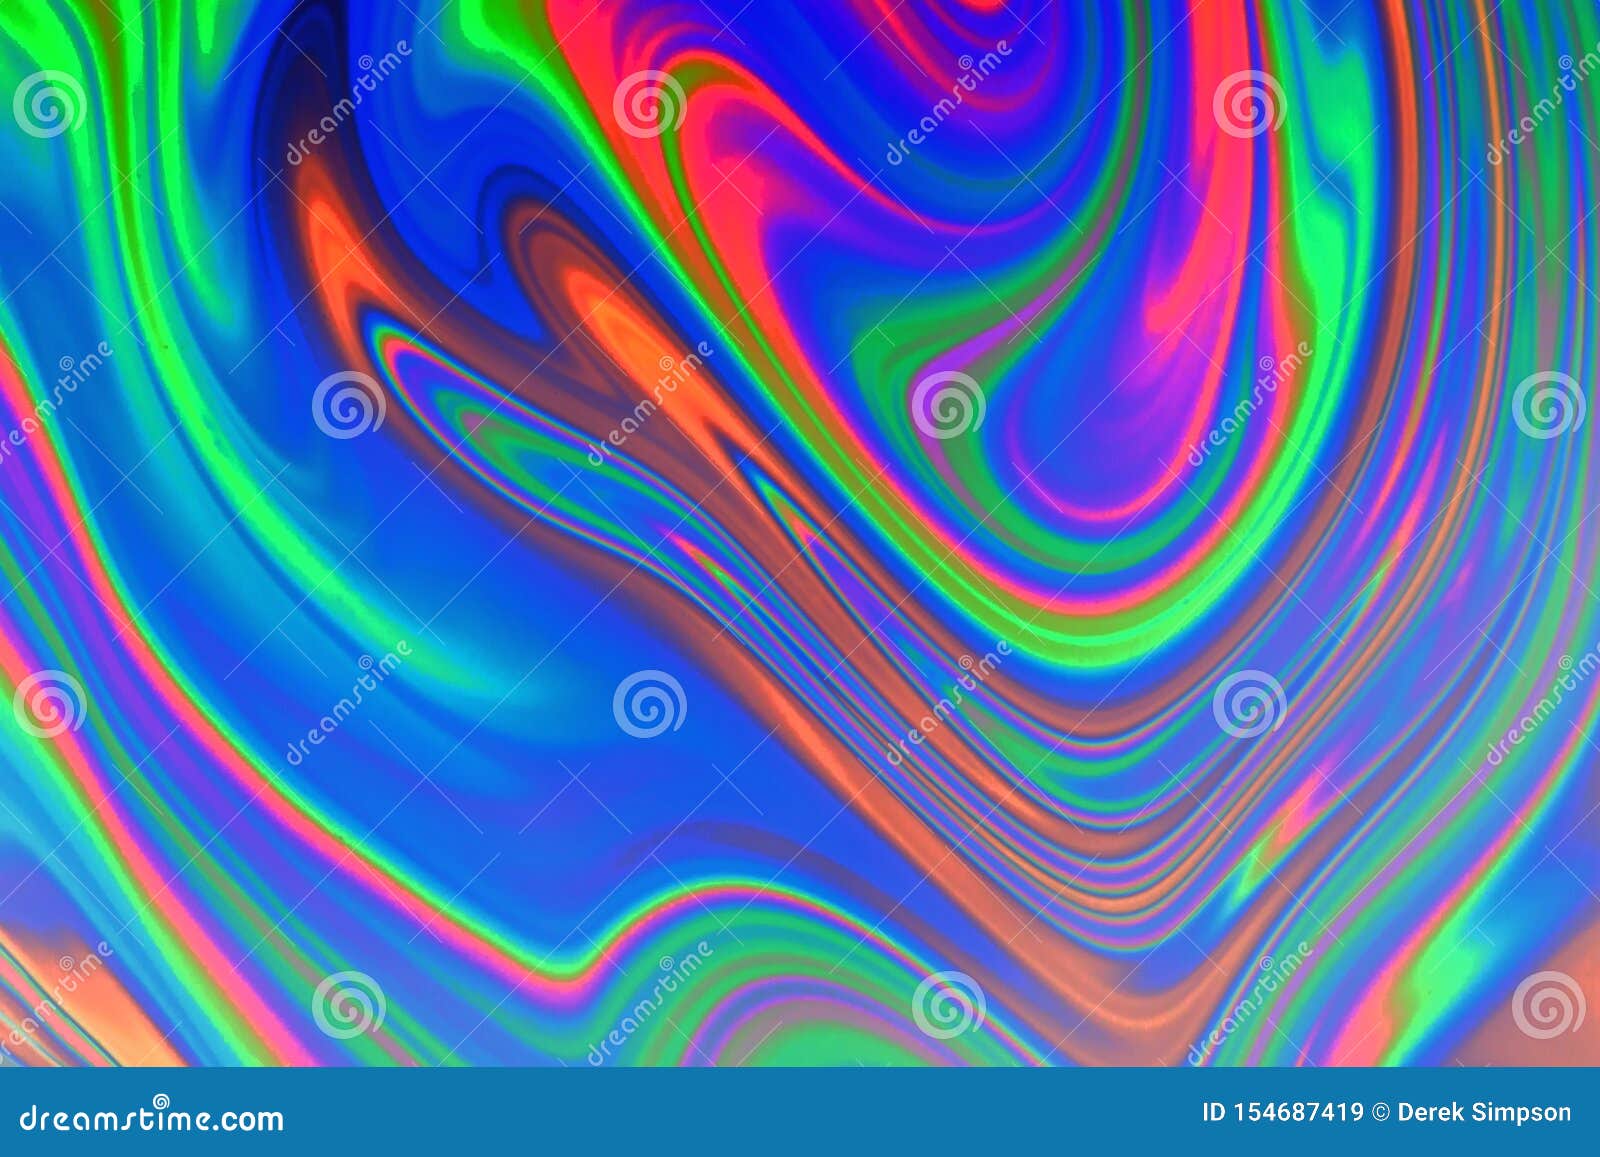 Red, Blue, Green and Orange Trippy Psychedelic Abstract Stock ...